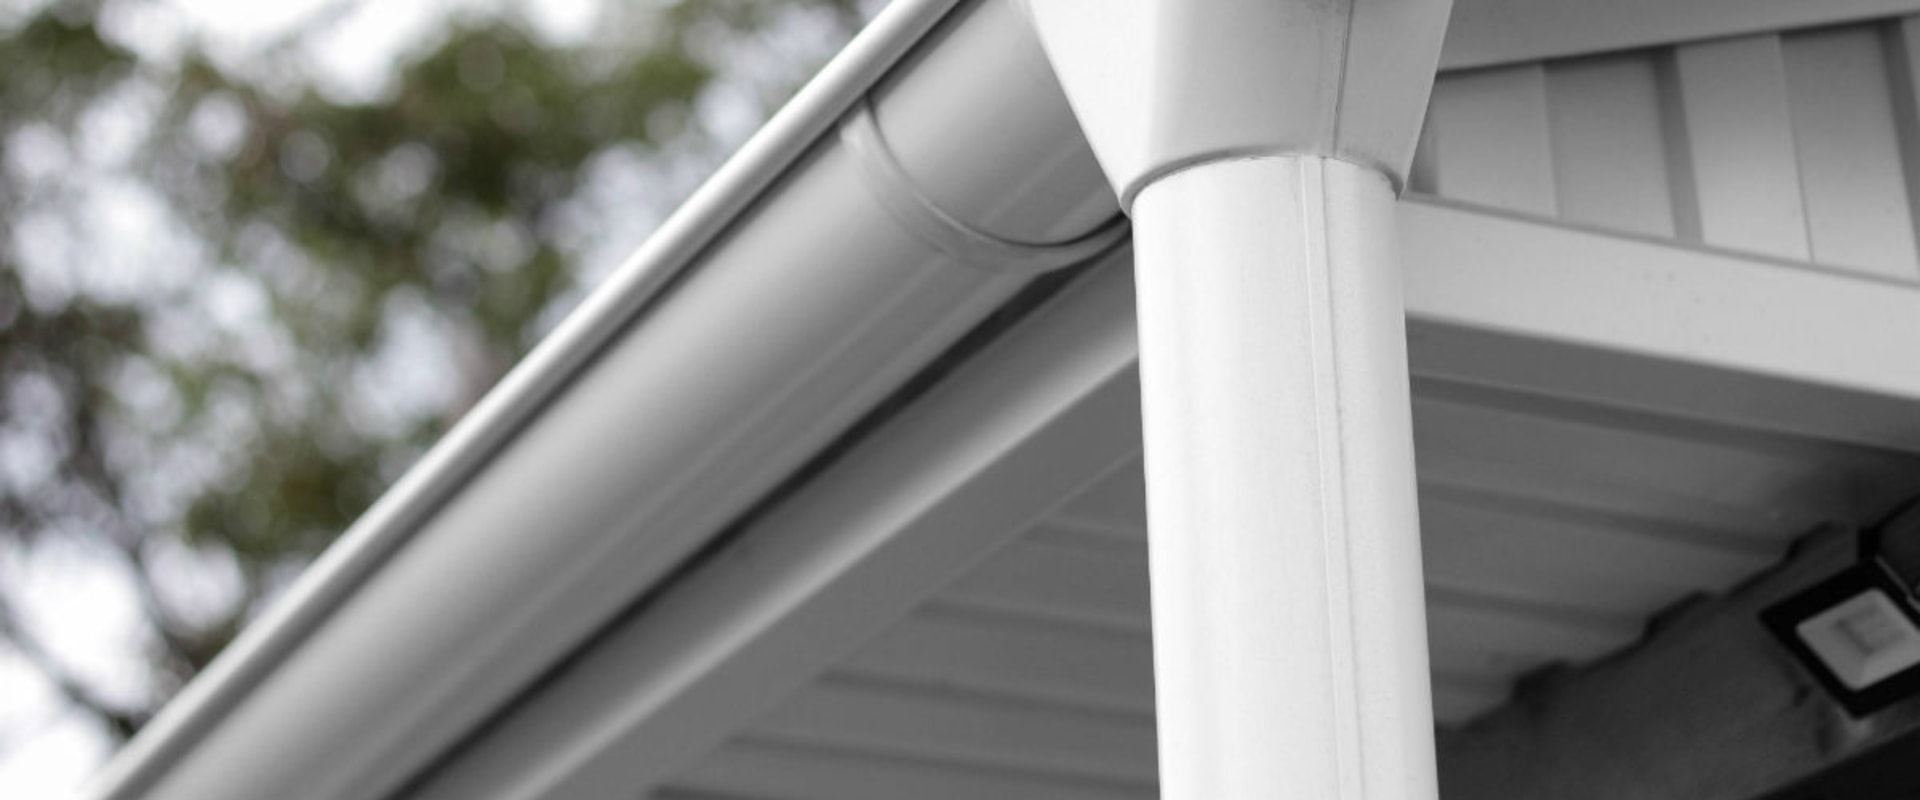 Aluminum or Vinyl Gutters: Which is the Best Choice?